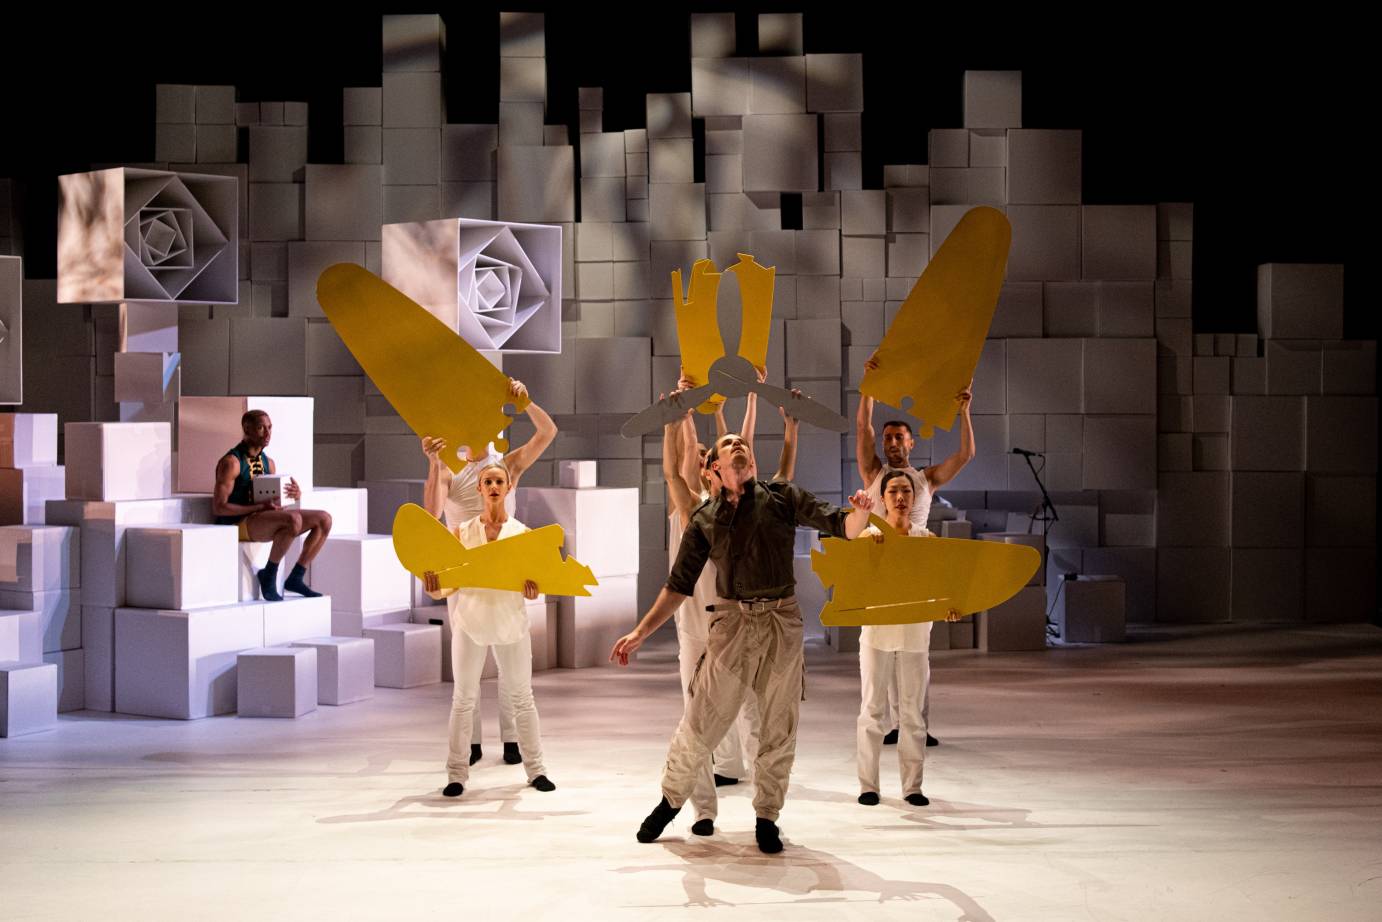 The cast holds pieces of yellow to suggest a plane in motion